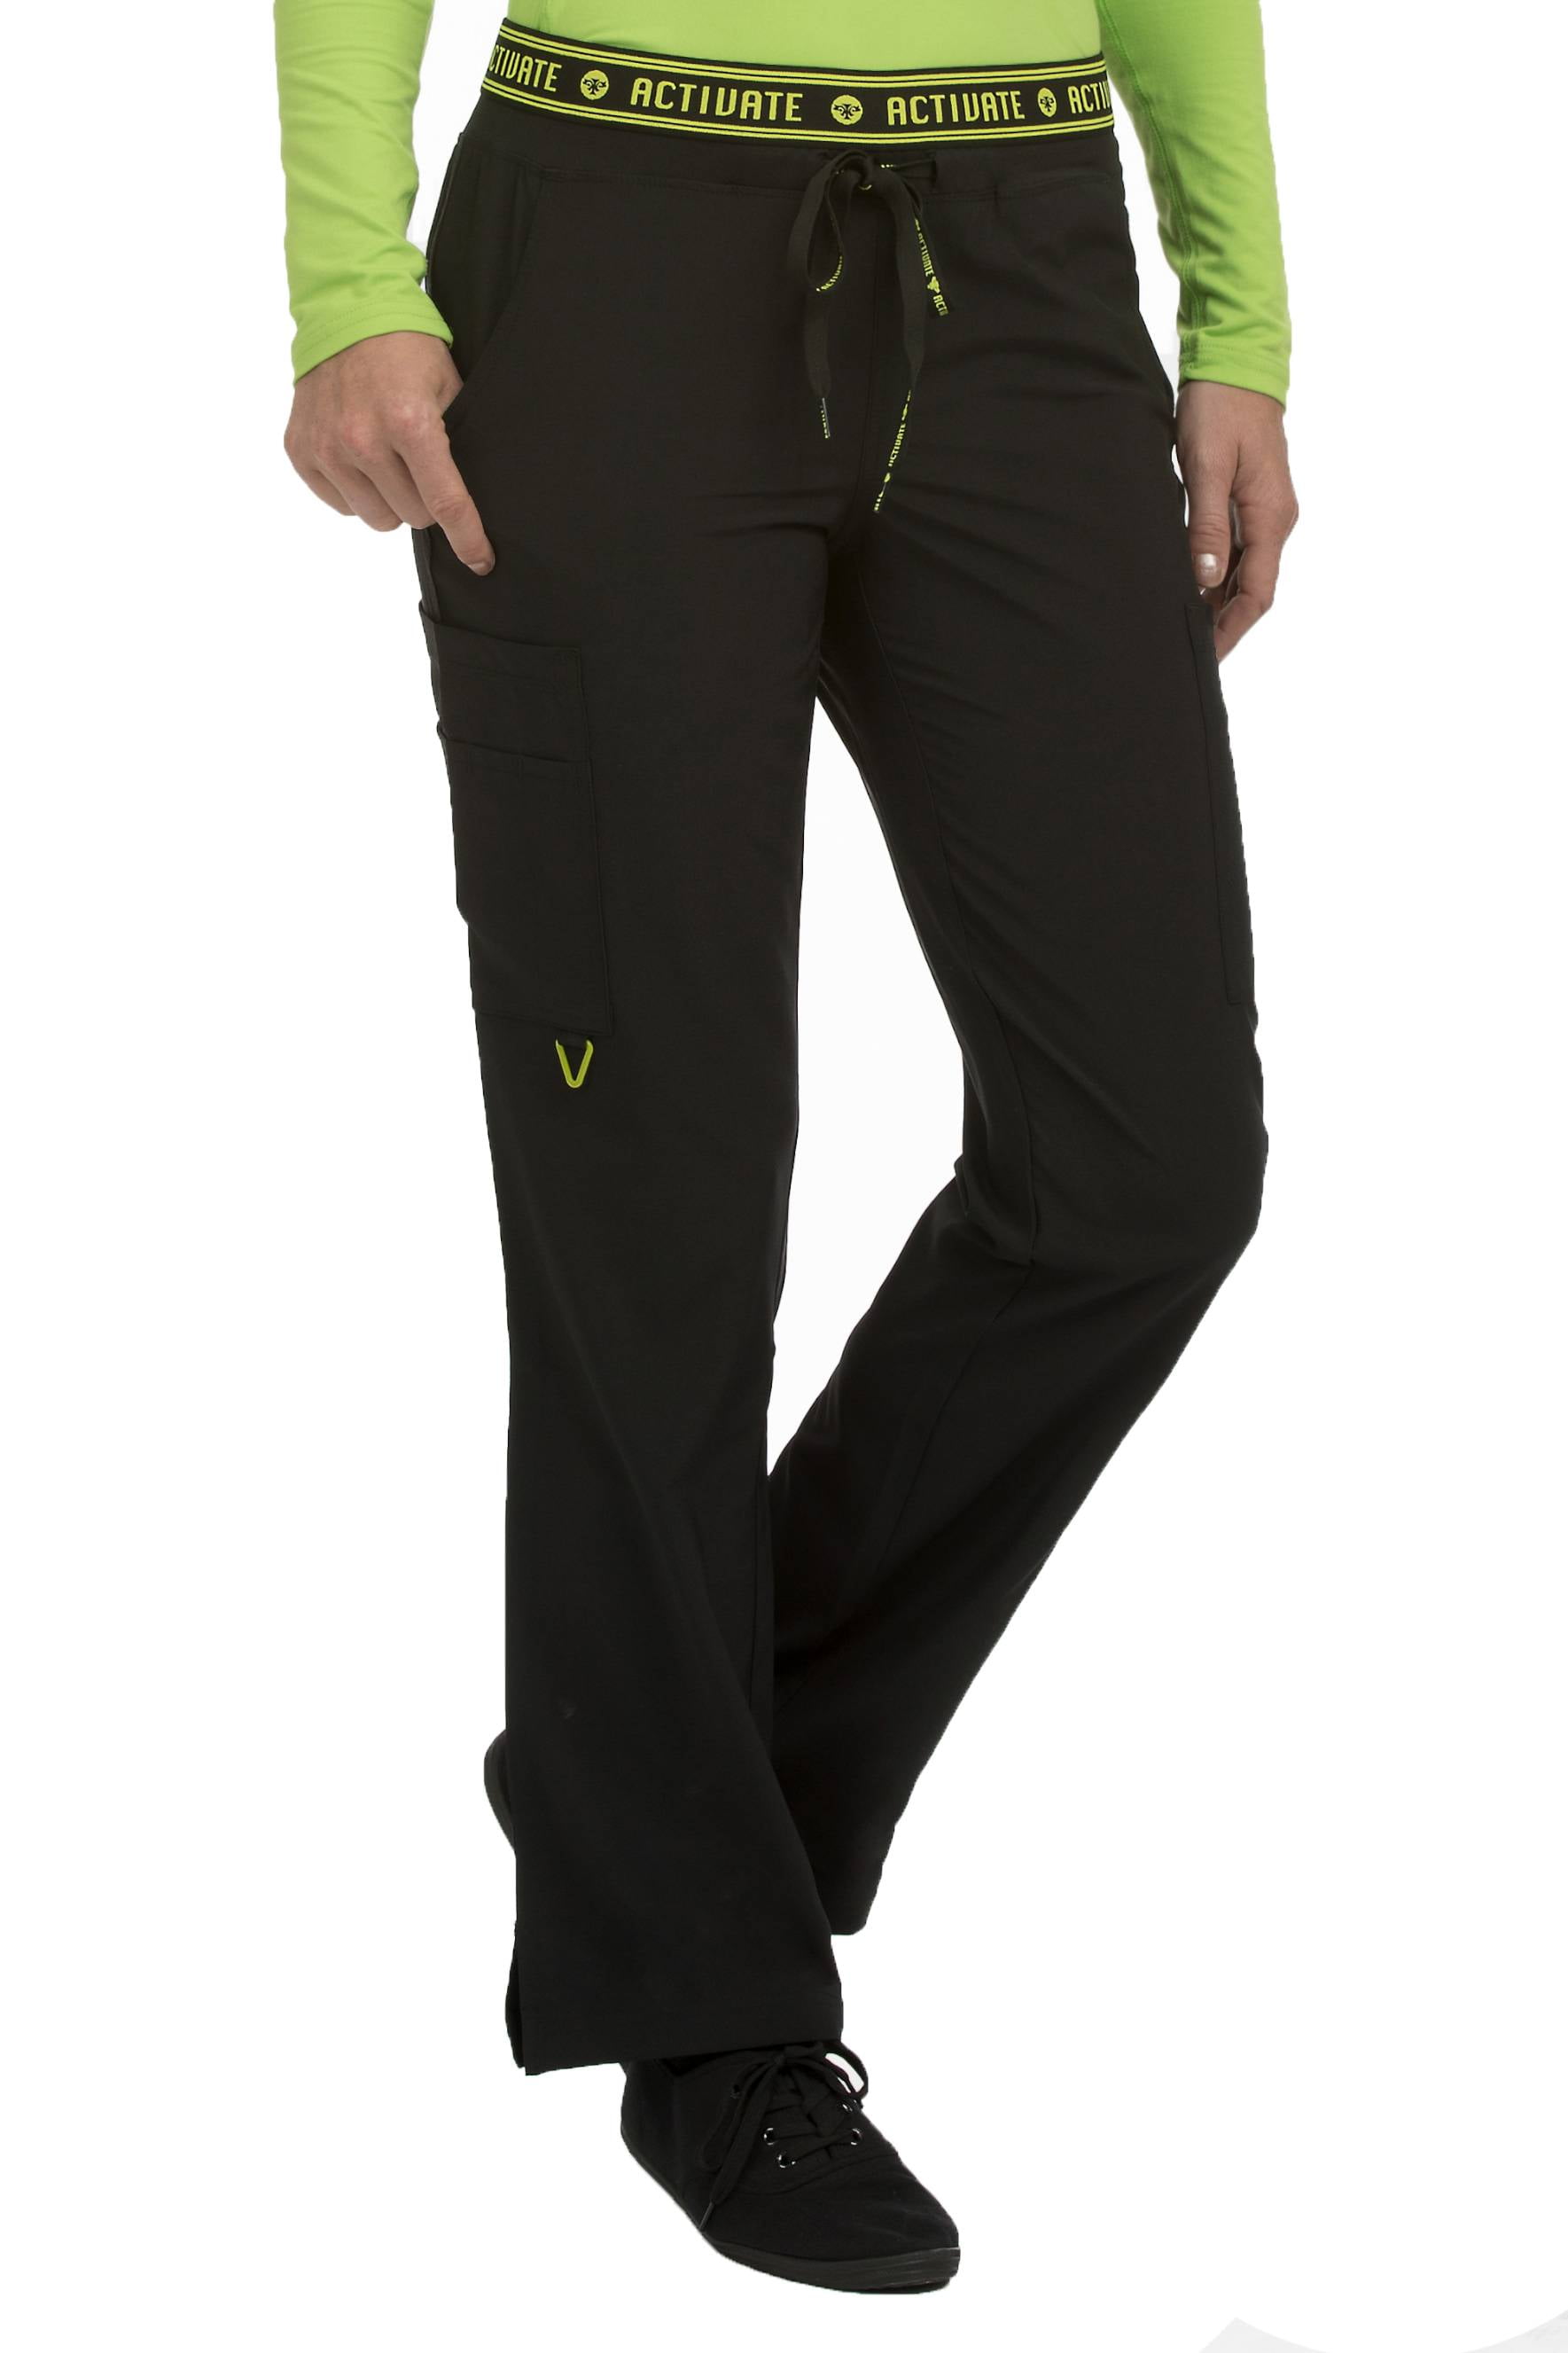 Med Couture Women's Activate Flow Yoga Two Pocket Cargo Pant 